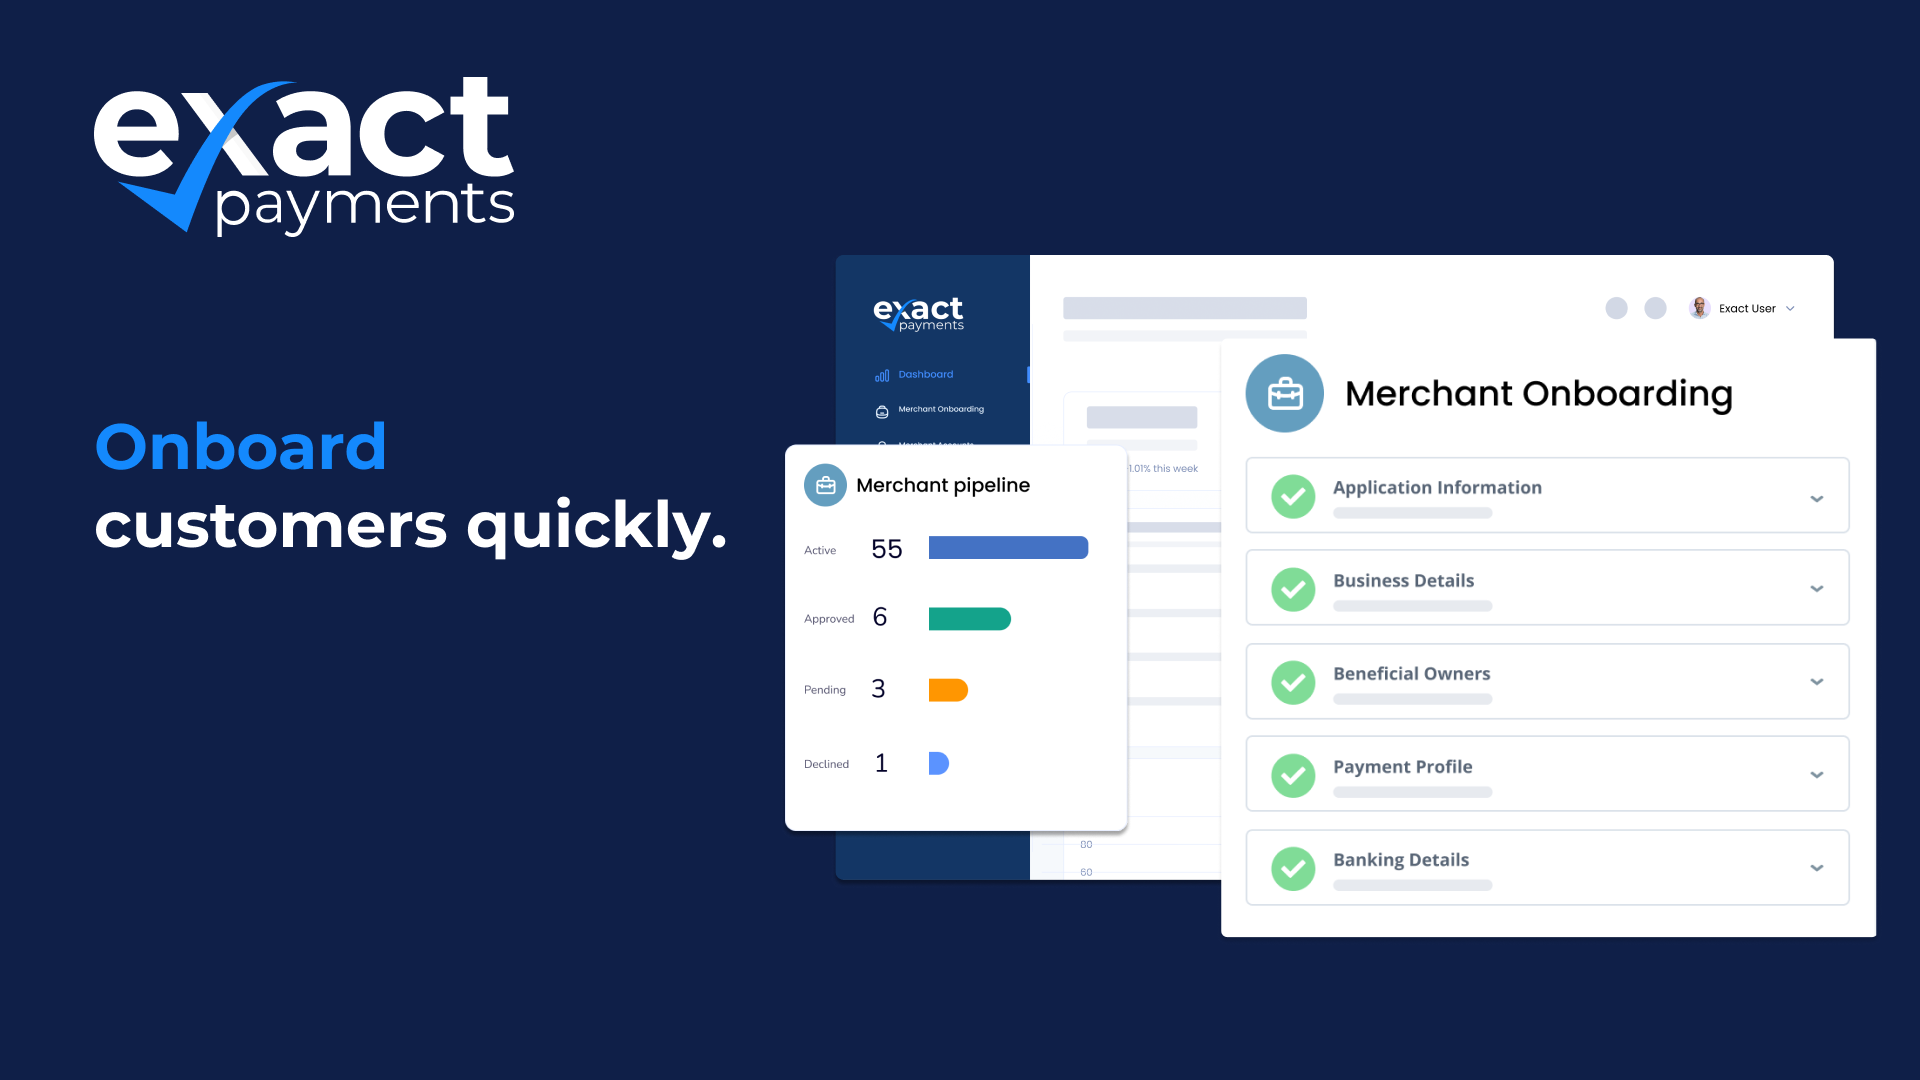 You’ve signed a new customer! Simply post merchant application data to our Onboarding API. We’ve automated underwriting for near real-time account decisioning. Once approved, receive a webhook notification with credentials and your customer is live.